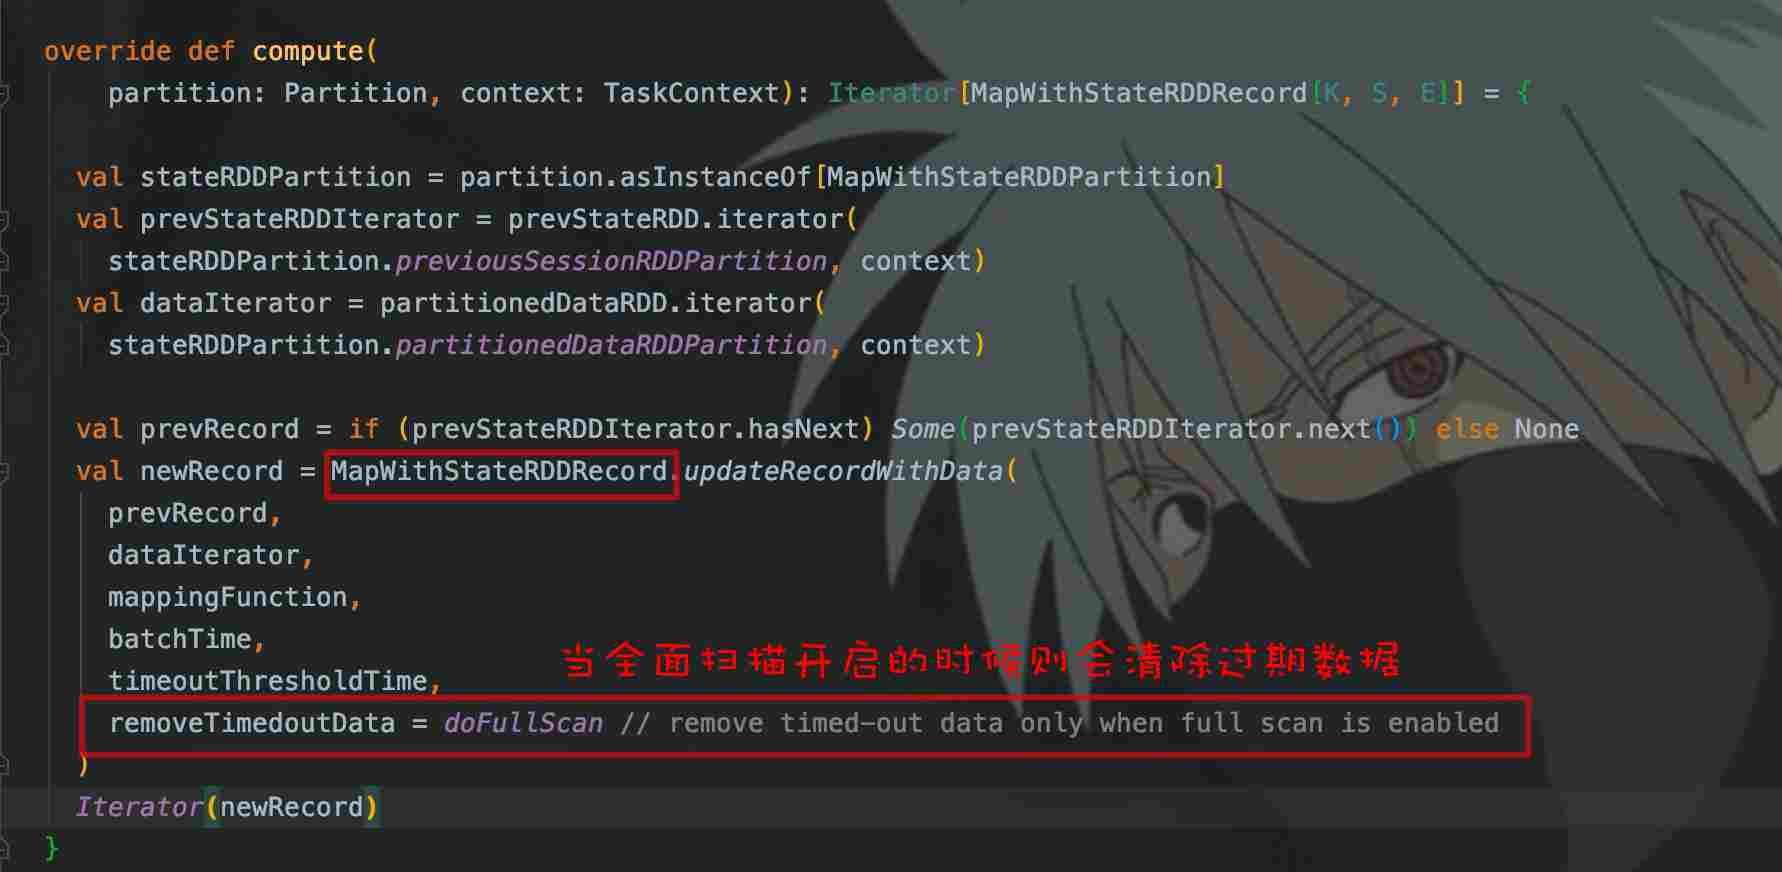 SparkStreaming使用mapWithState时，设置timeout()无法生效问题解决方案